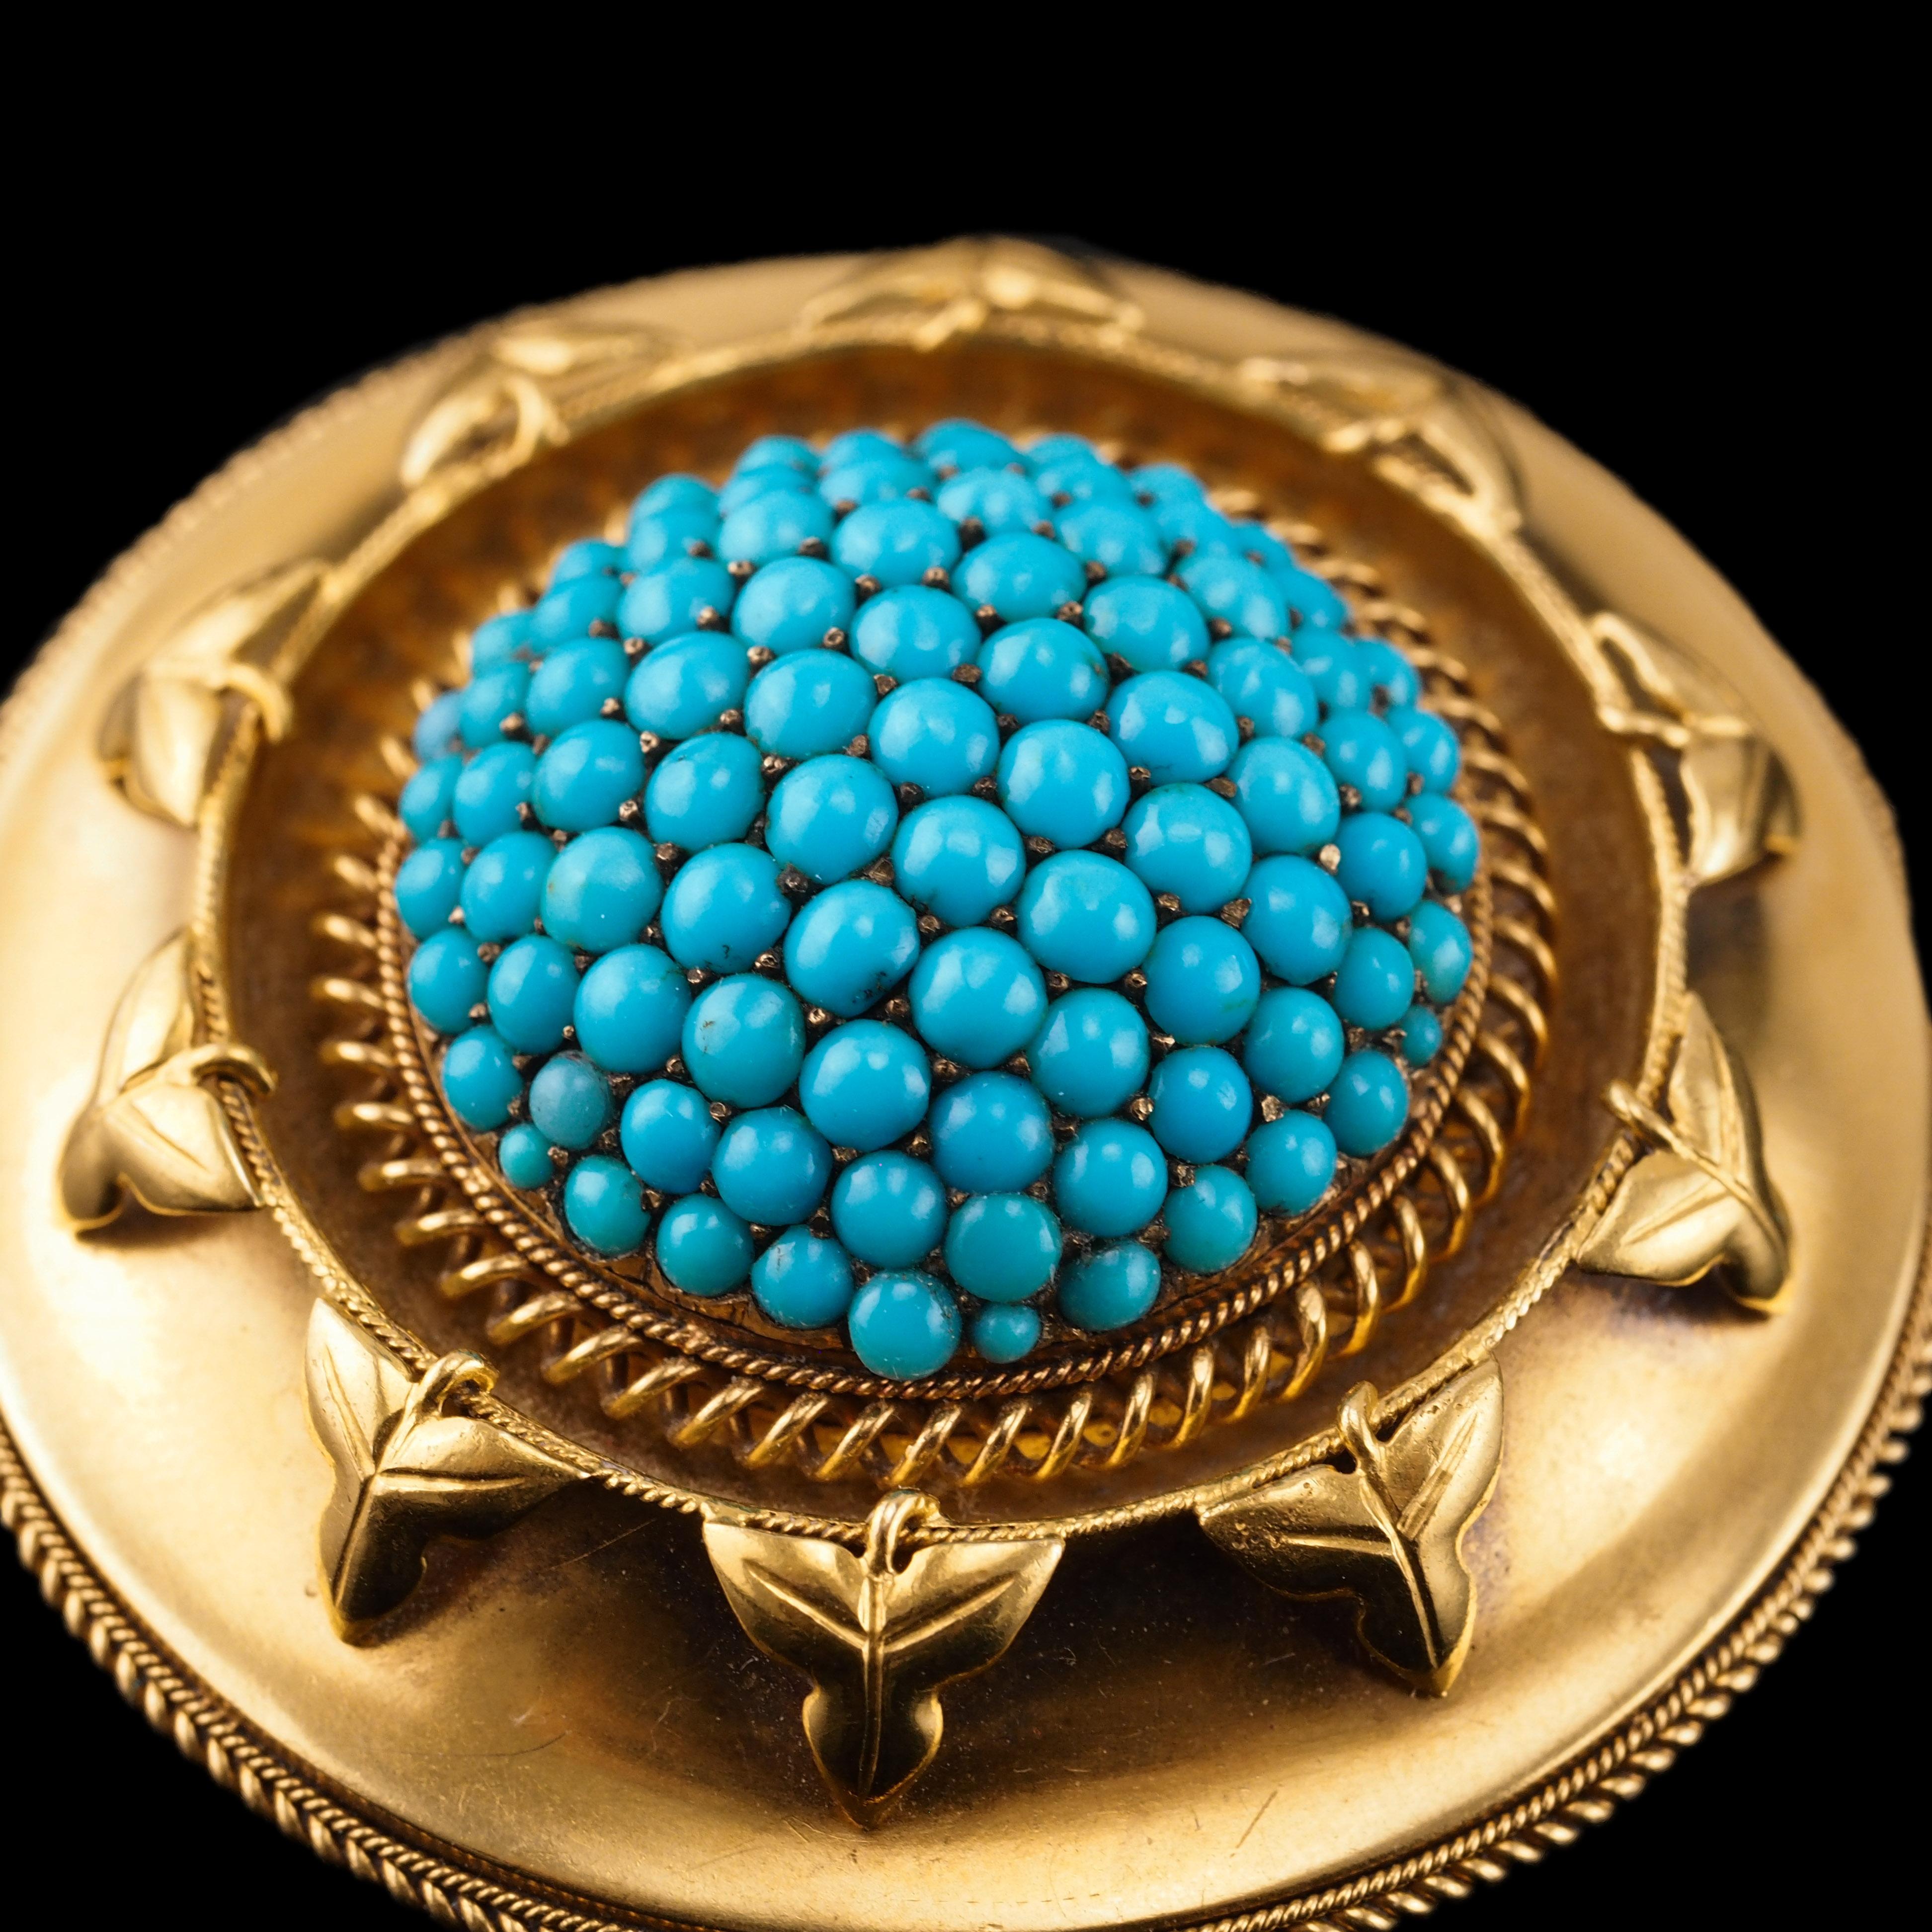 Antique Victorian Turquoise Pendant Necklace Brooch 18K Gold Etruscan c.1880 For Sale 1